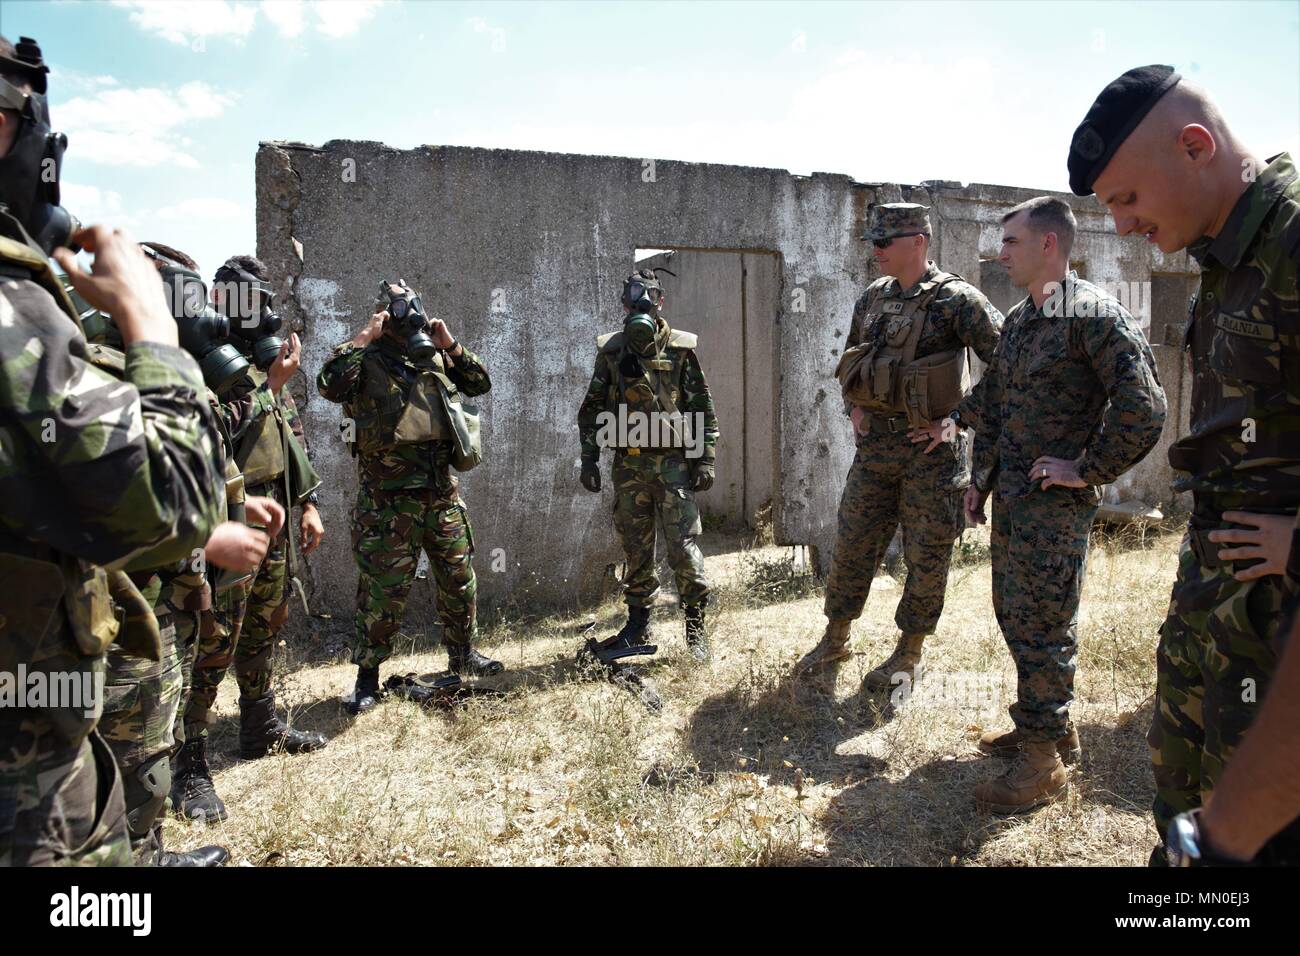 U.S. Marines with Black Sea Rotational Force 17.1 go through don and clear procedures with the Romanian military aboard Novo Selo Training Area, Bulgaria, Aug. 2, 2017. This range was a part of Exercise Platinum Lion 17.2, a multinational exercise to build relationships with NATO Allies and partner nations through combined arms training. (U.S. Marine Corps photo by Sgt. Patricia A. Morris) Stock Photo